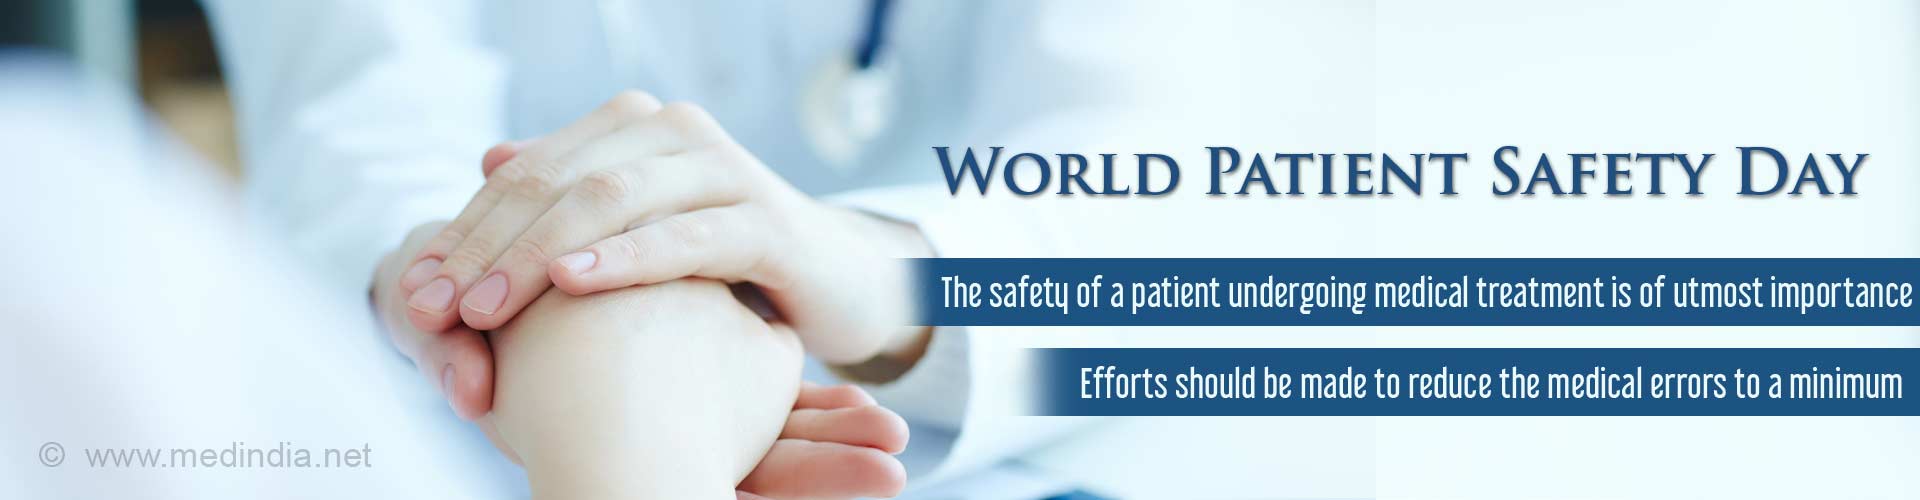 World Patient Safety Day
- The safety of a patient undergoing medical treatment is of utmost importance
- Efforts should be made to reduce the medical errors to a minimum